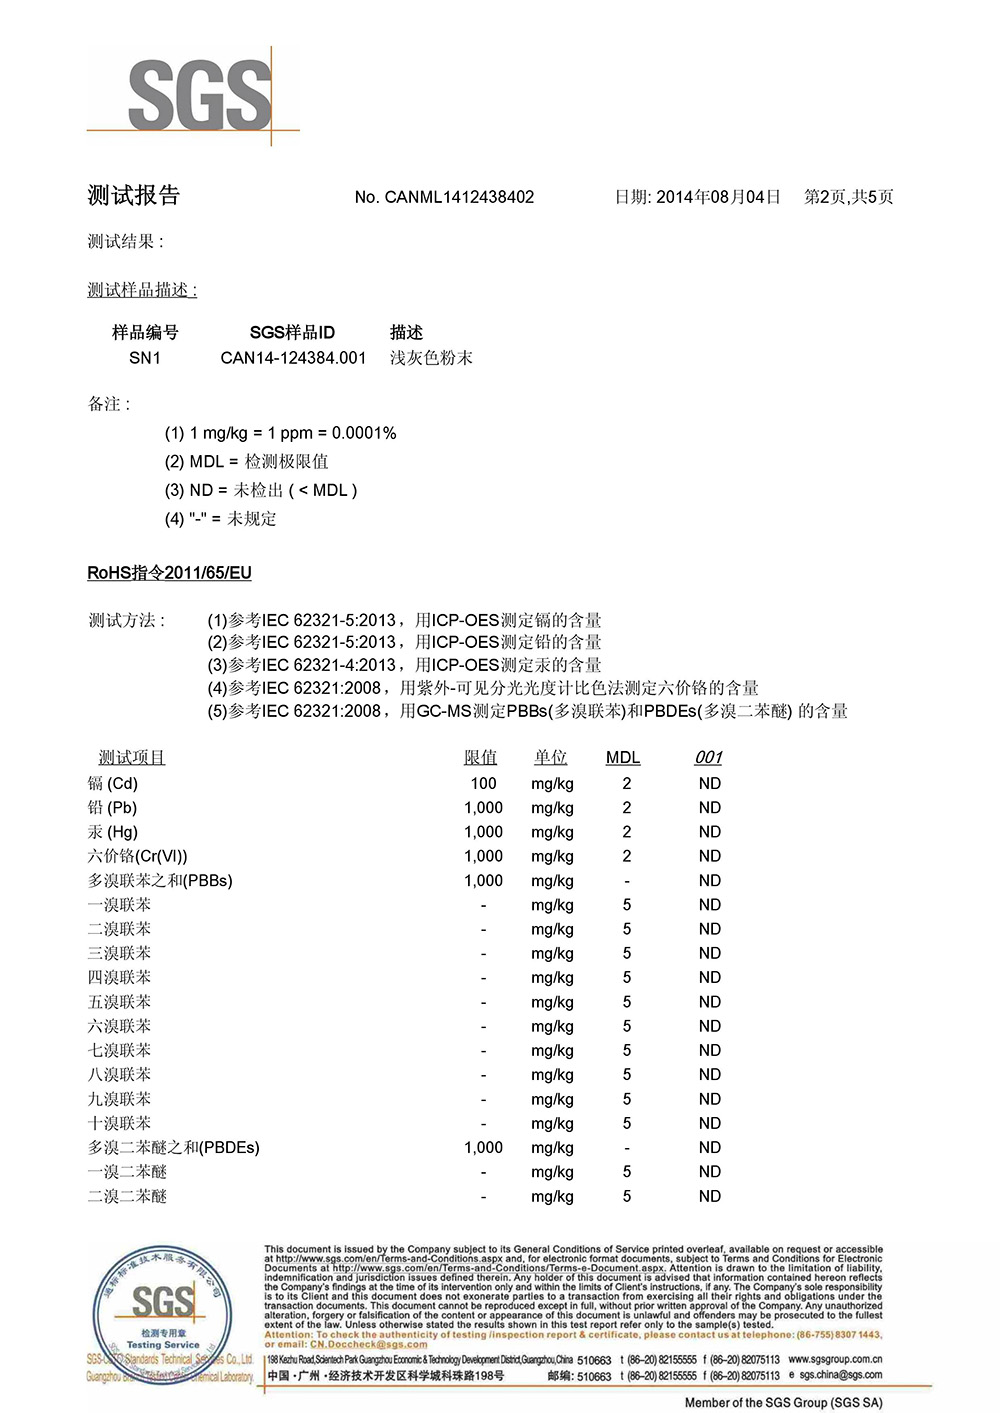 Powder Coating - Chinese SGS Test Report (2)